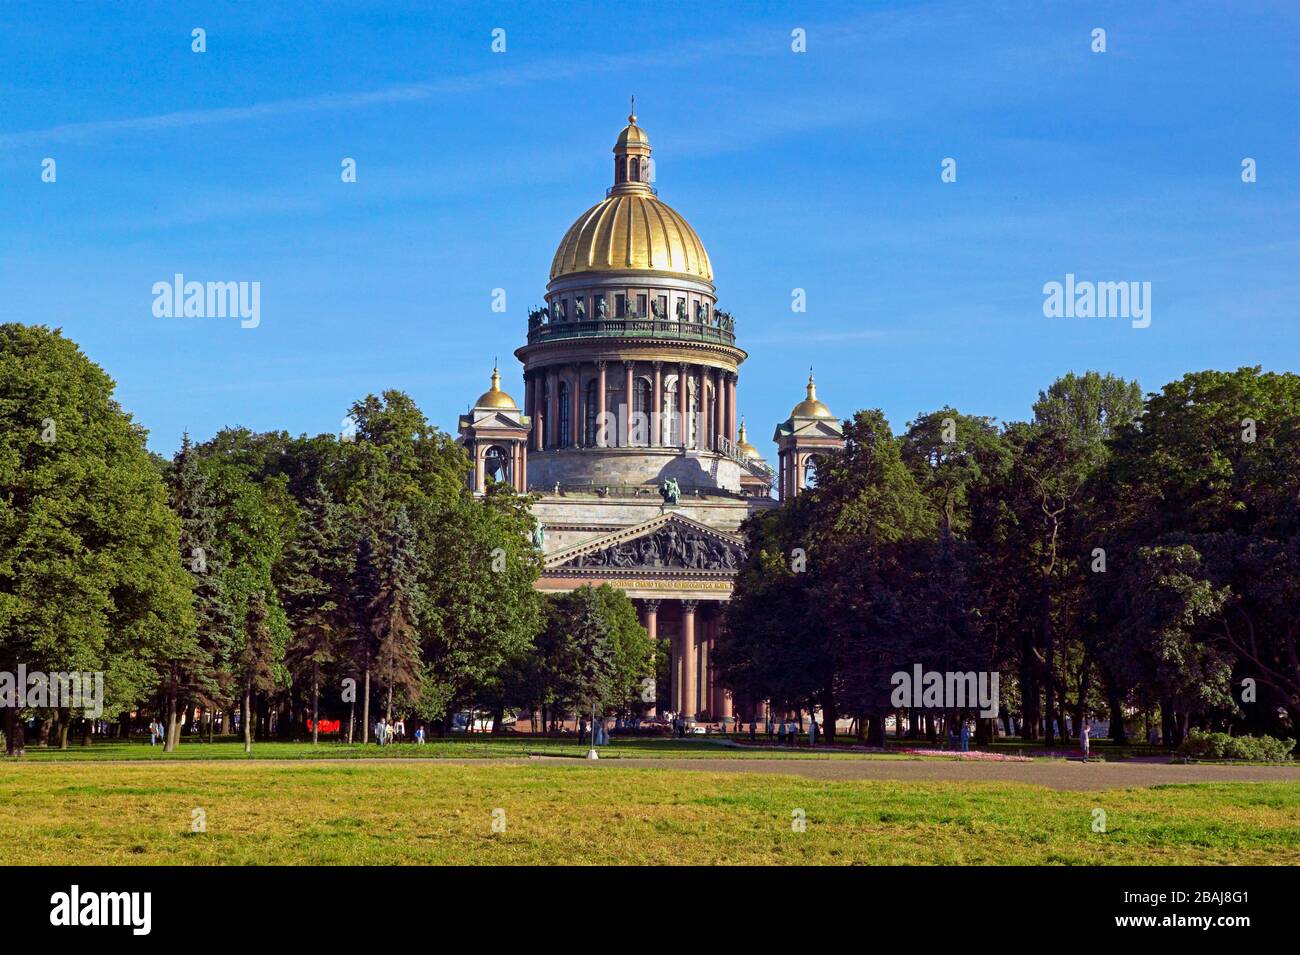 St. Isaac's Cathedral on Isaac square in St. Petersburg, Russian Federation Stock Photo